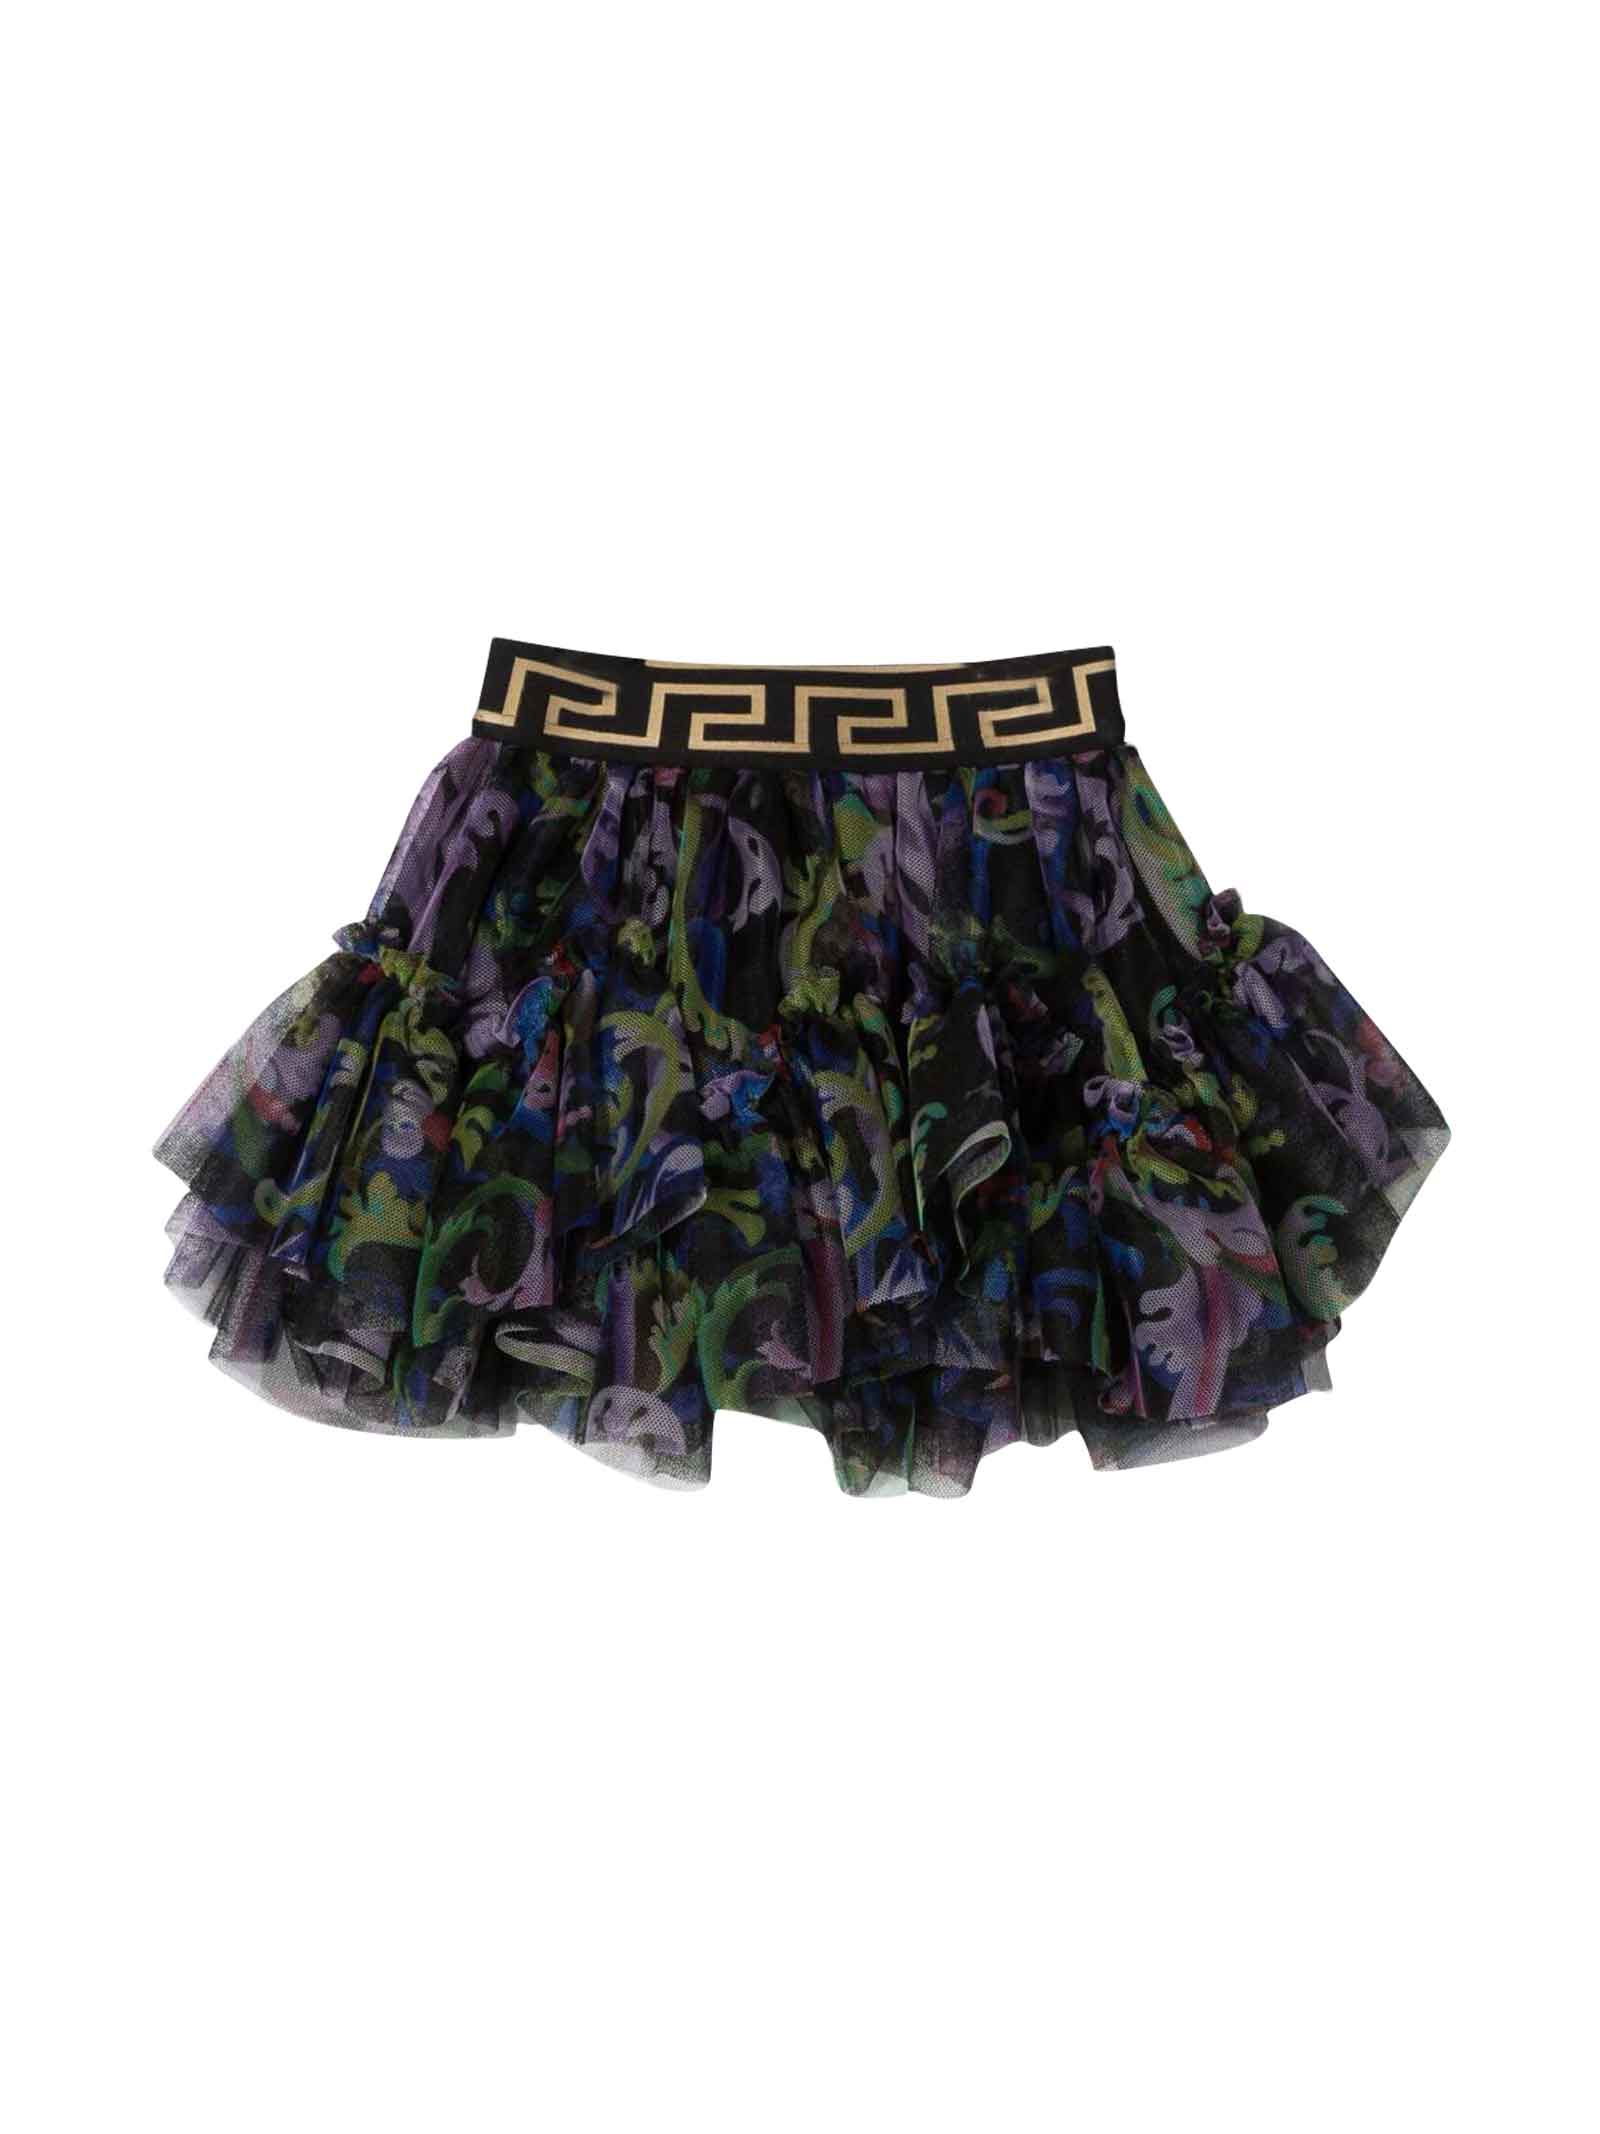 Versace Young Girls Patterned Skirt